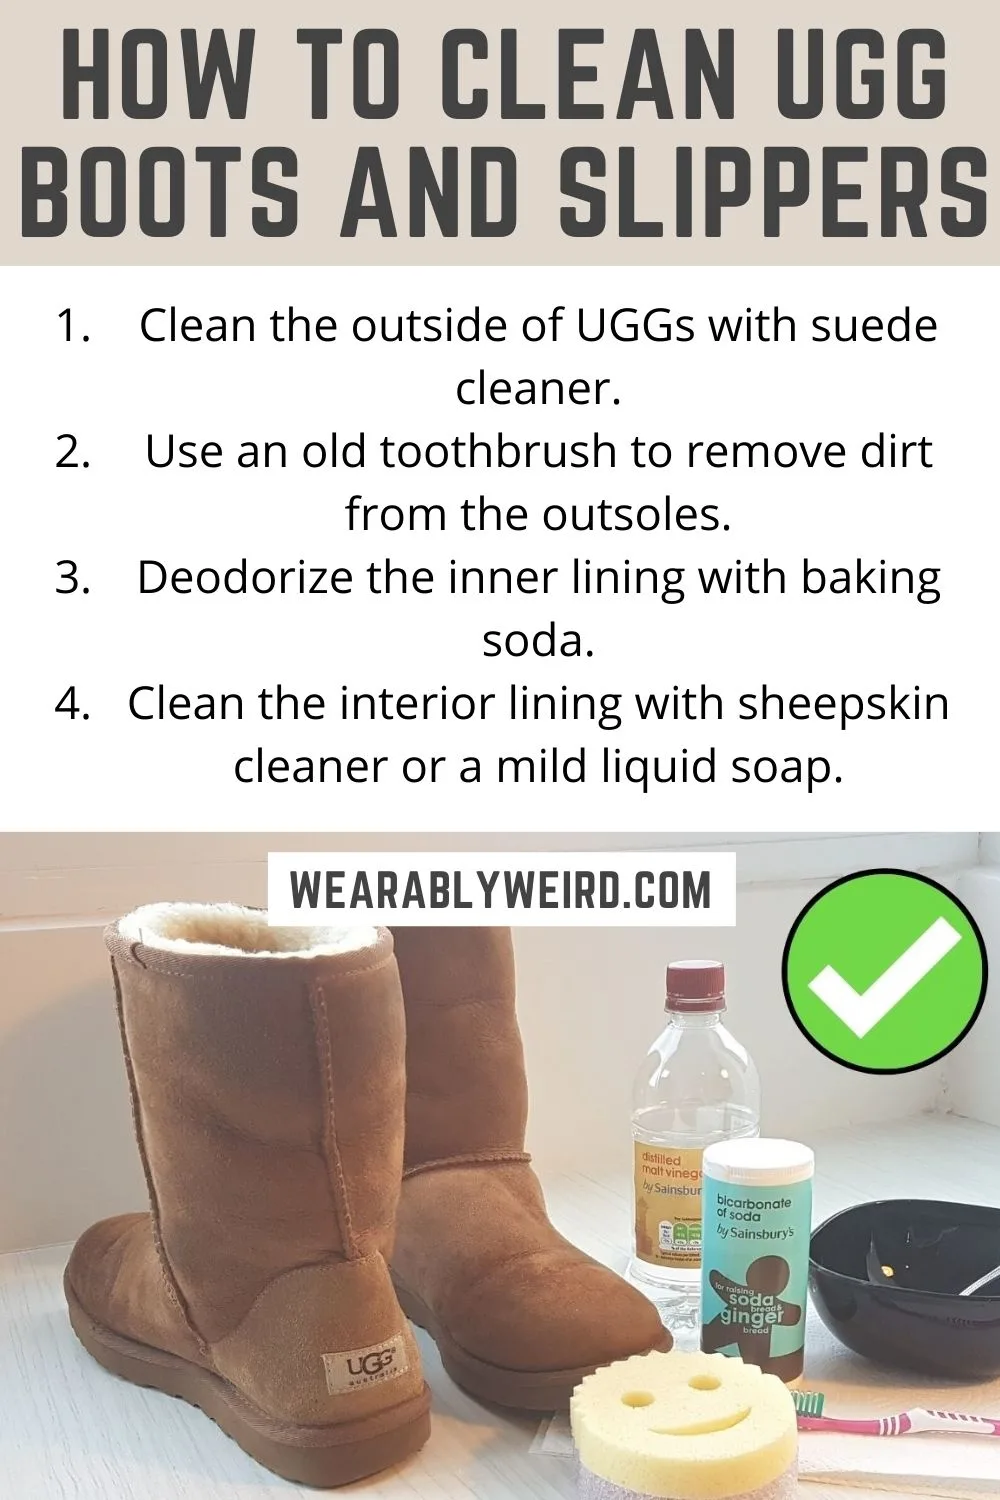 How to Clean UGG Boots and UGG Slippers